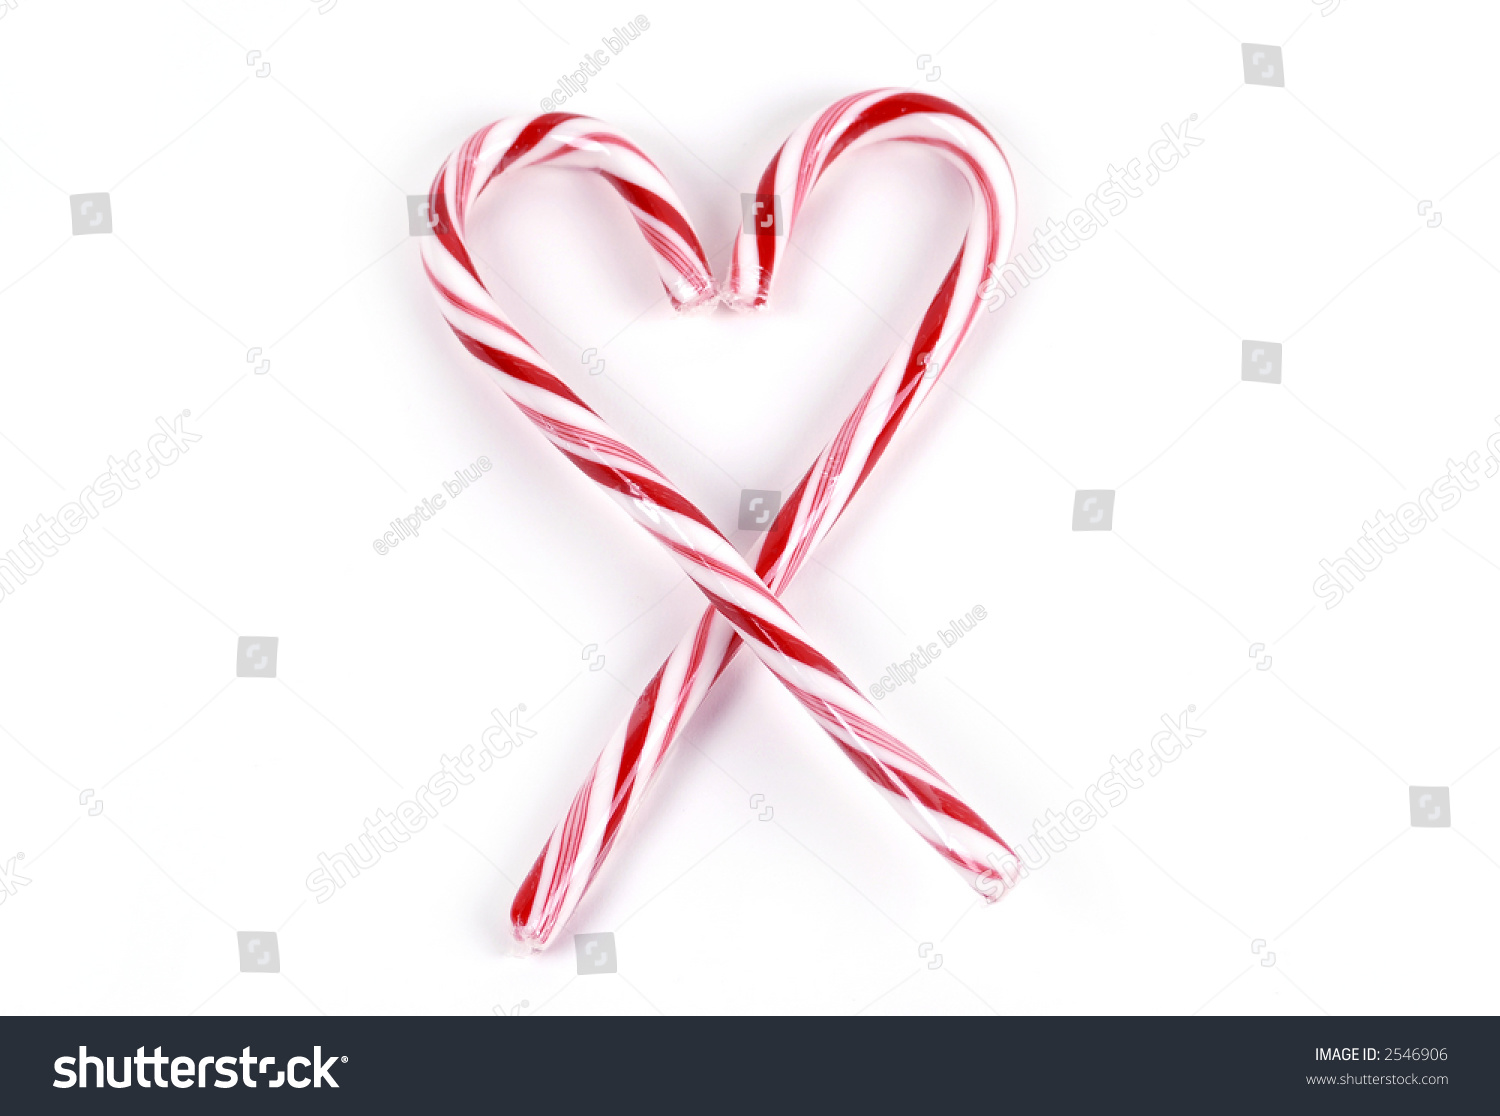 Two Striped Candy Canes Shaped Into Stock Photo 2546906 - Shutterstock